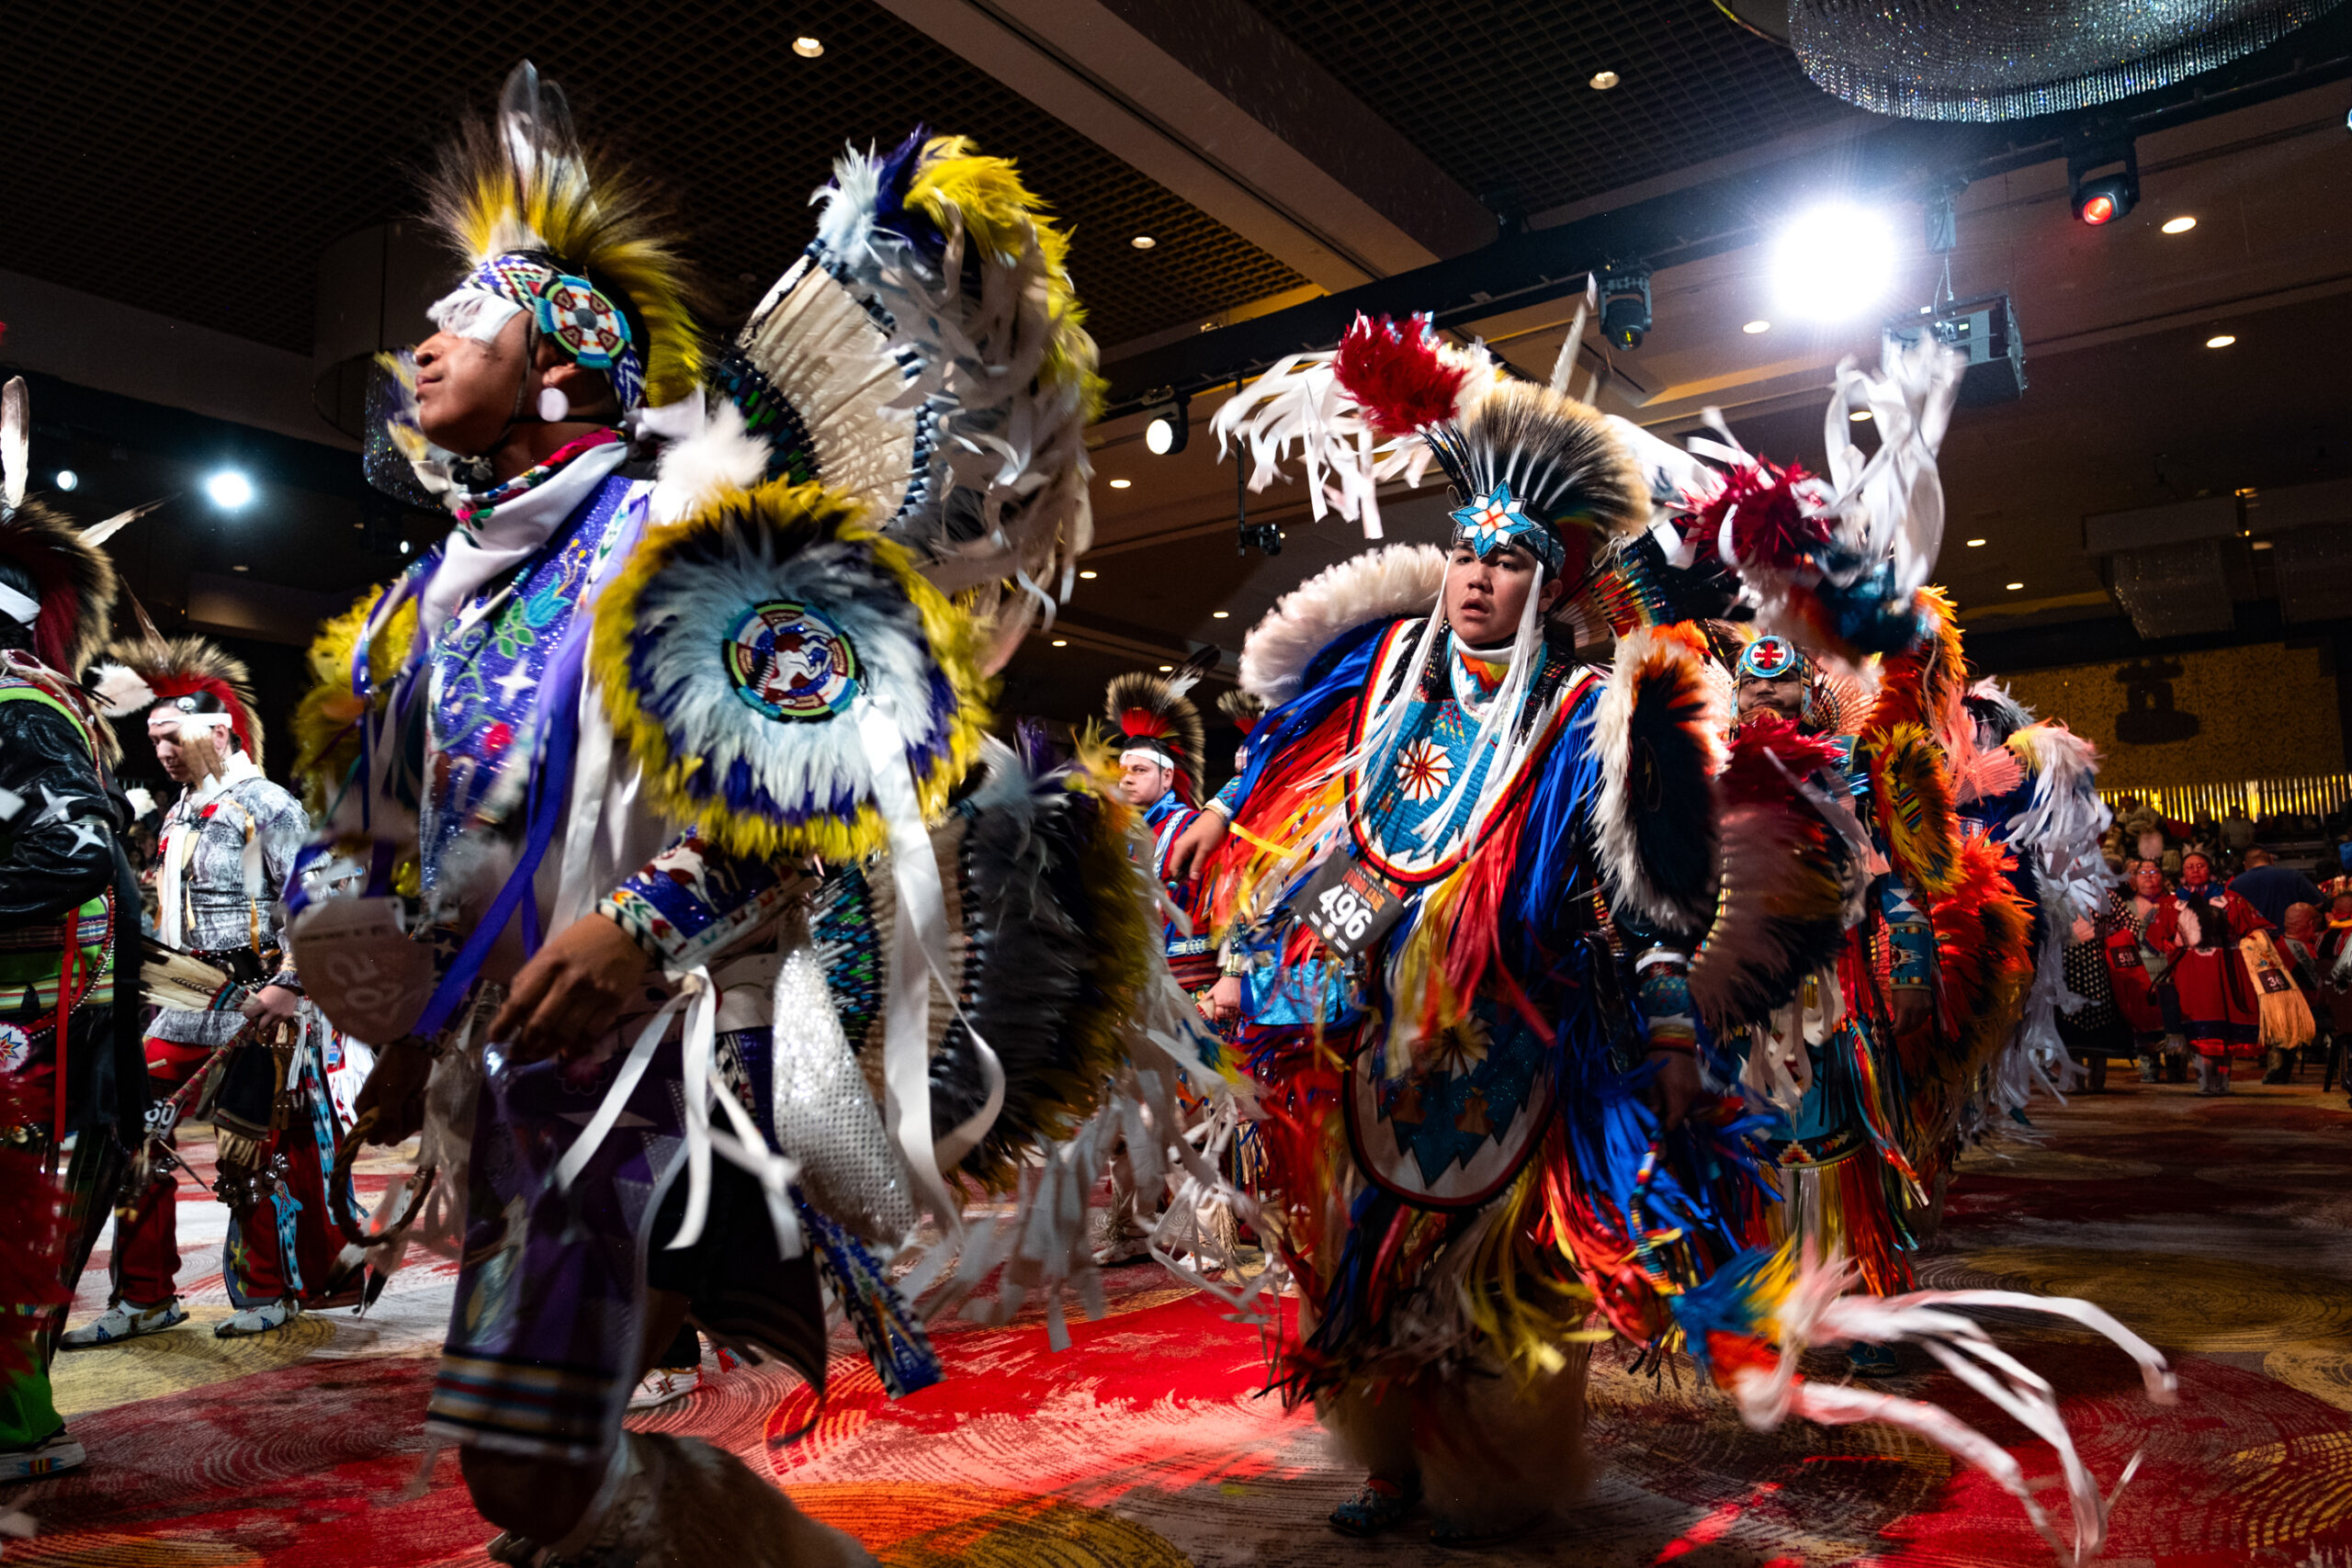 Dancers make their way into the arena during the 51st annual Seminole Tribal Fair and Powwow, Friday, Feb. 9 at the Seminole Hard Rock Casino in Hollywood, Fla.